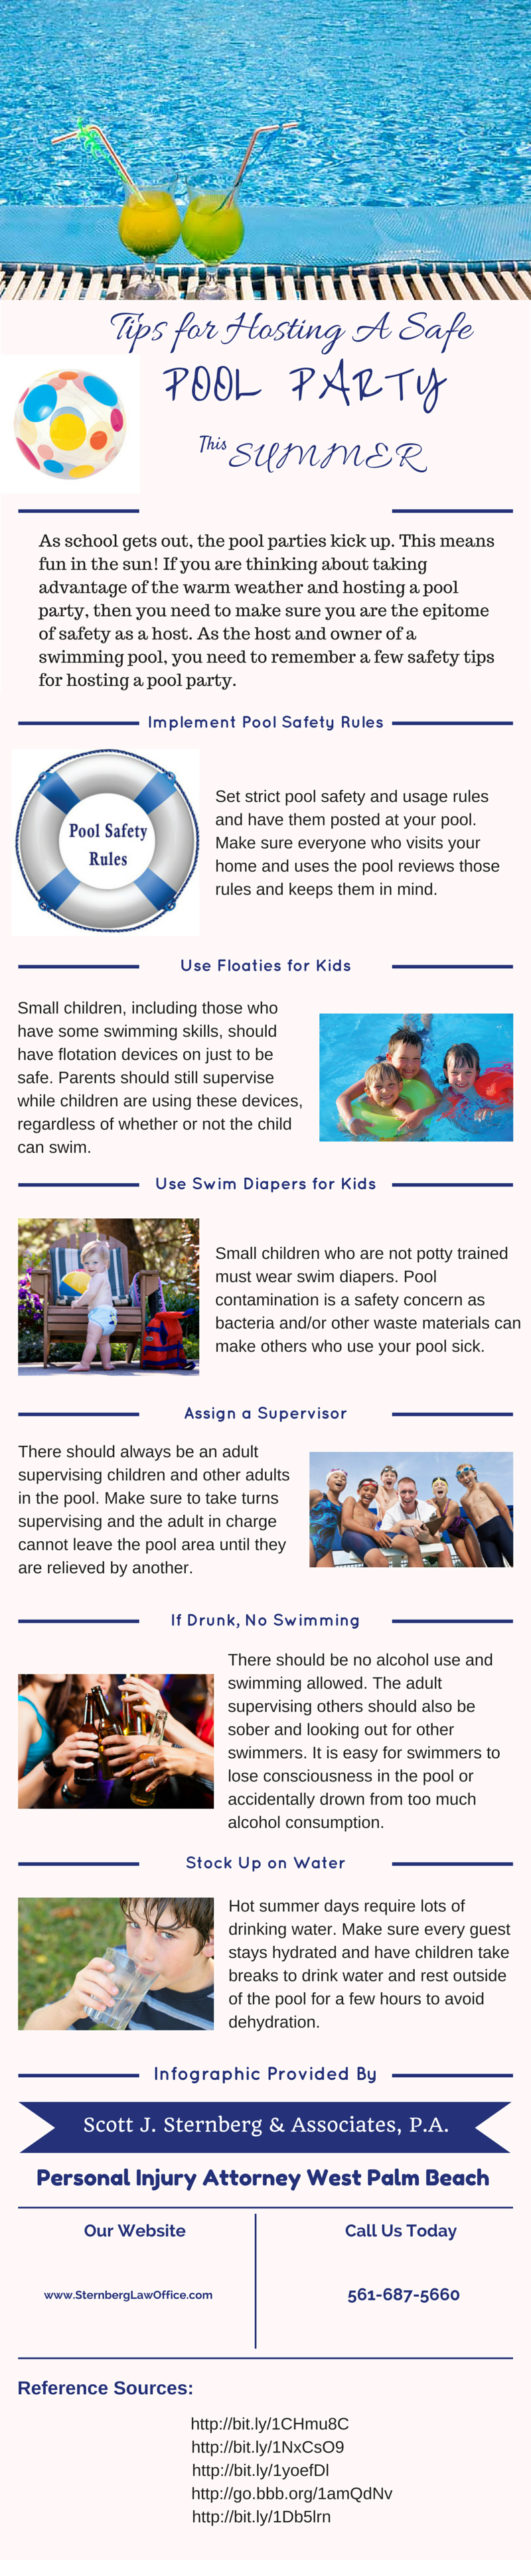 Tips for hosting a safe pool party this summer